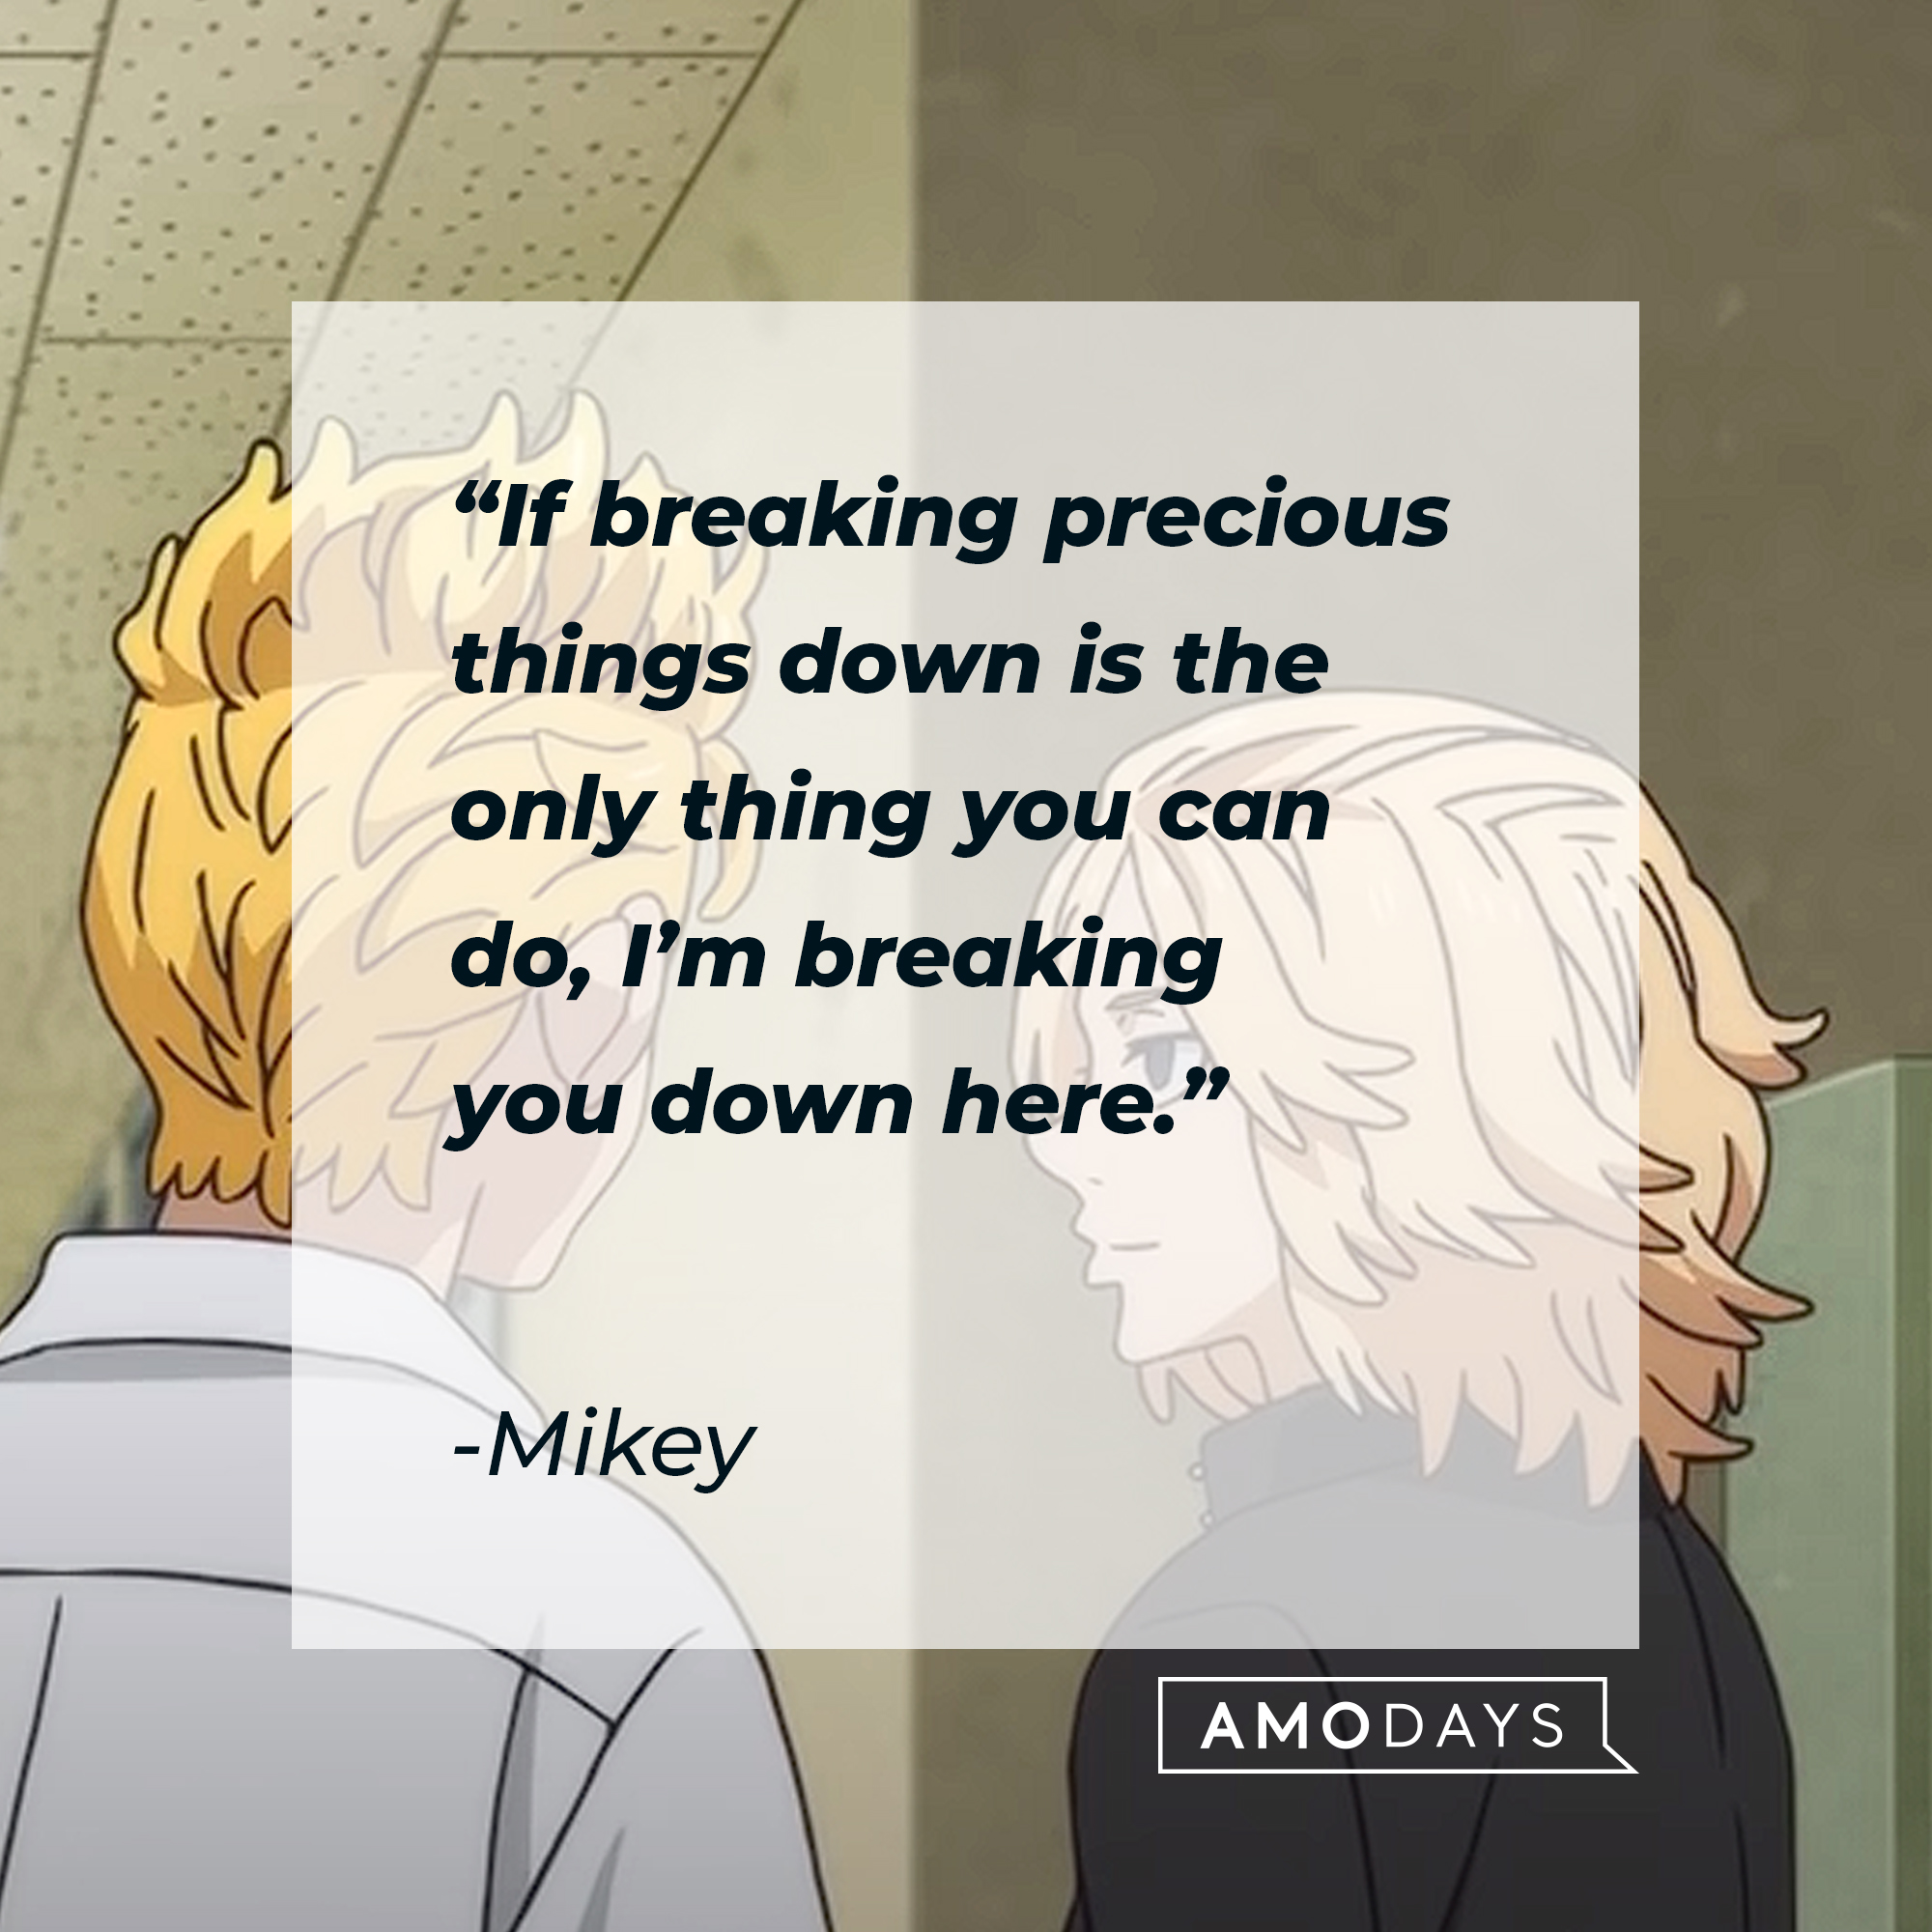 An image of Mikey and  Hanagaki Takemicchi with Mikey’s quote: “If breaking precious things down is the only thing you can do, I’m breaking you down here.” | Source: youtube.com/CrunchyrollCollection